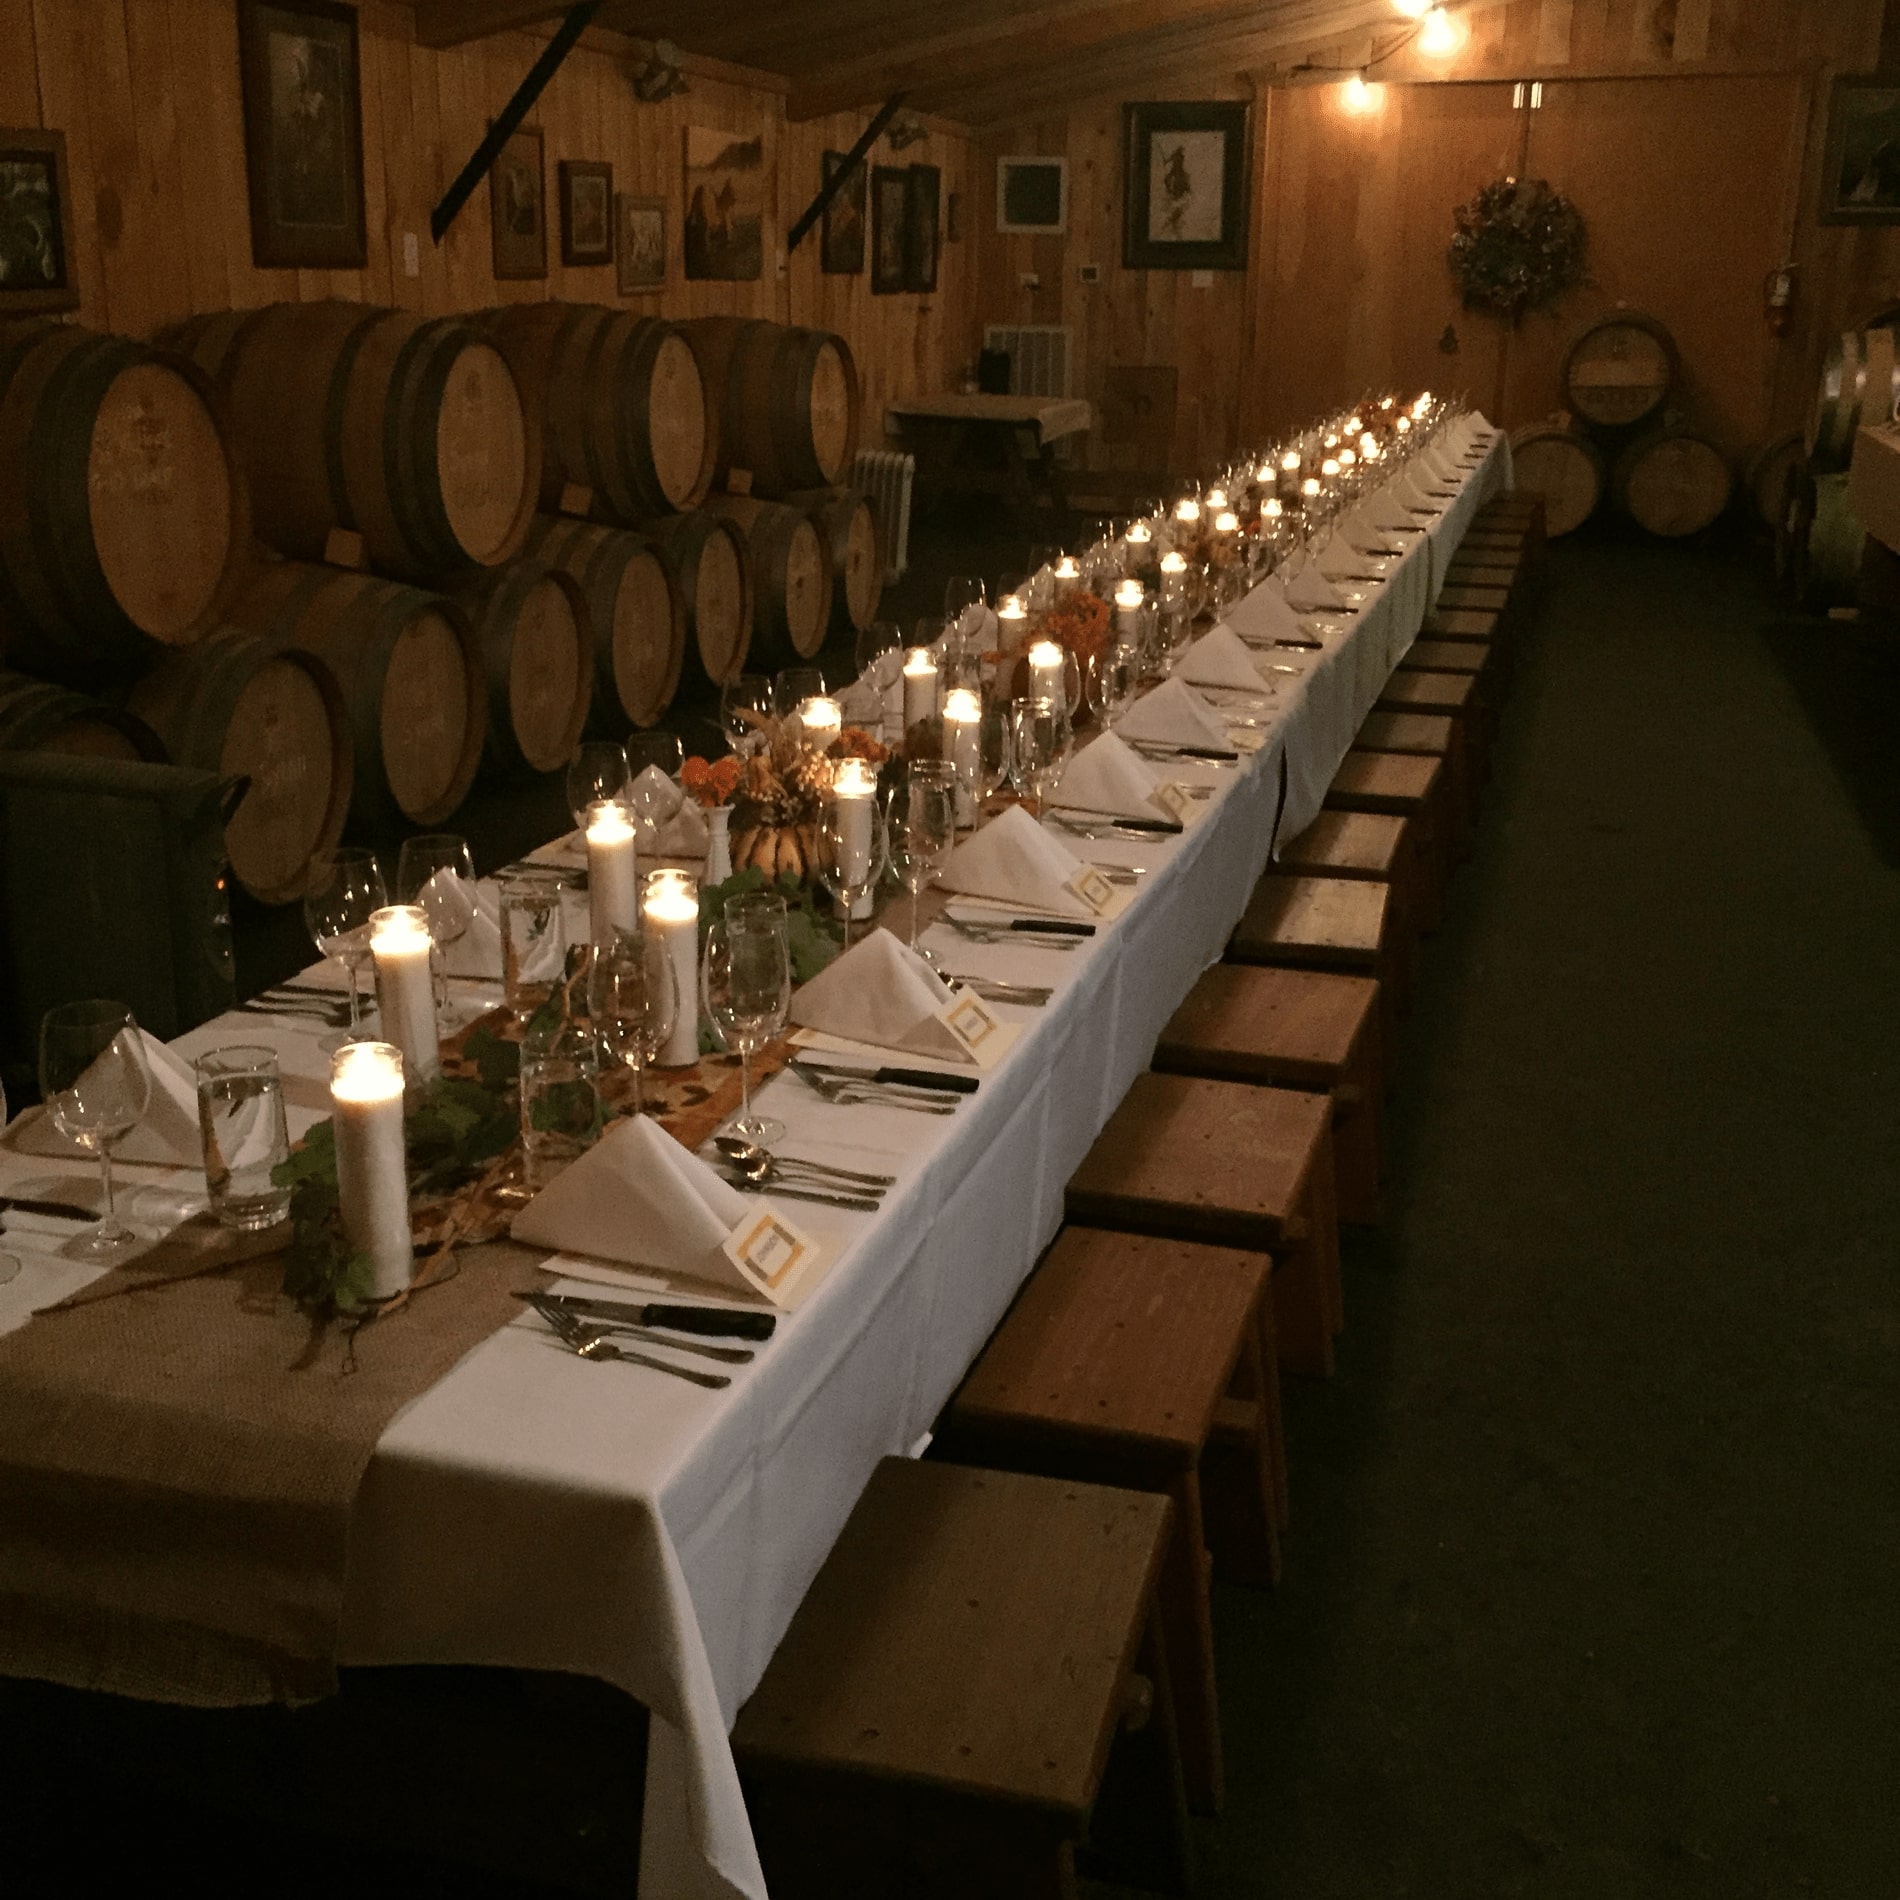 Image of long table settings with candles, napkins all in a row. A dimly lit room with barrels against the wall.